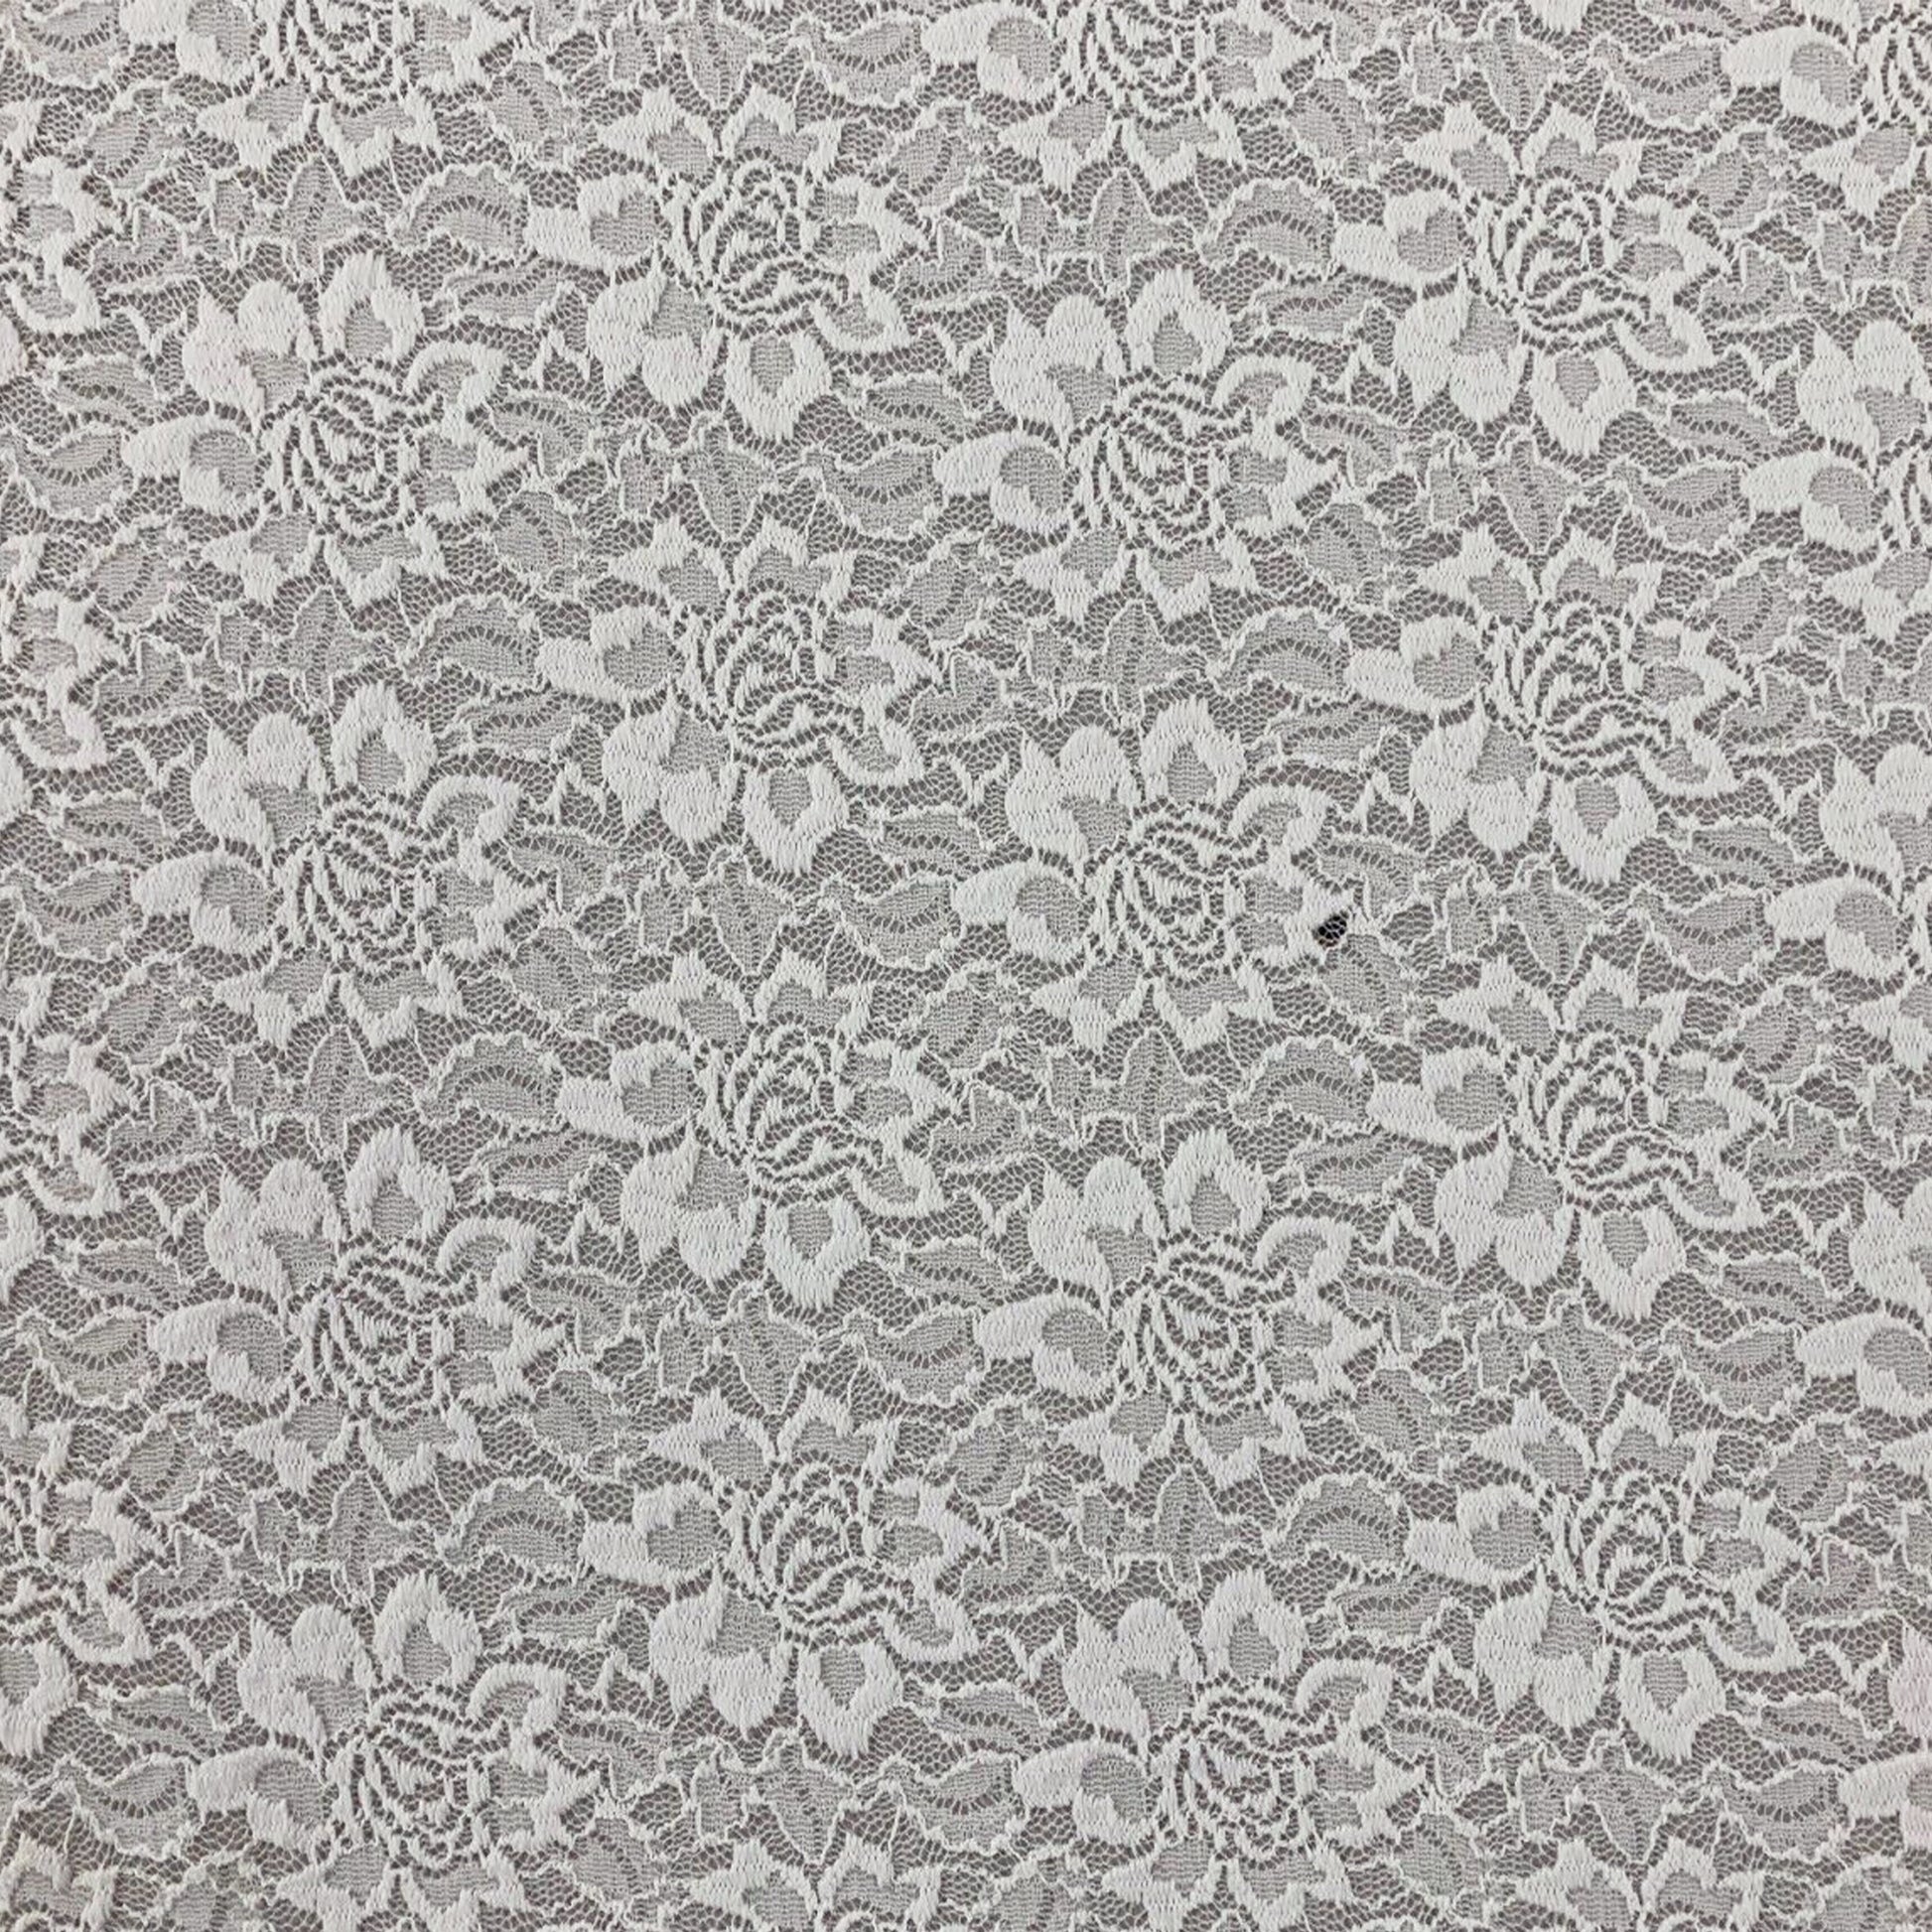 Ivory white floral stretch lace fabric for sewing and clothing projects shown on a black base to show off the flowers 